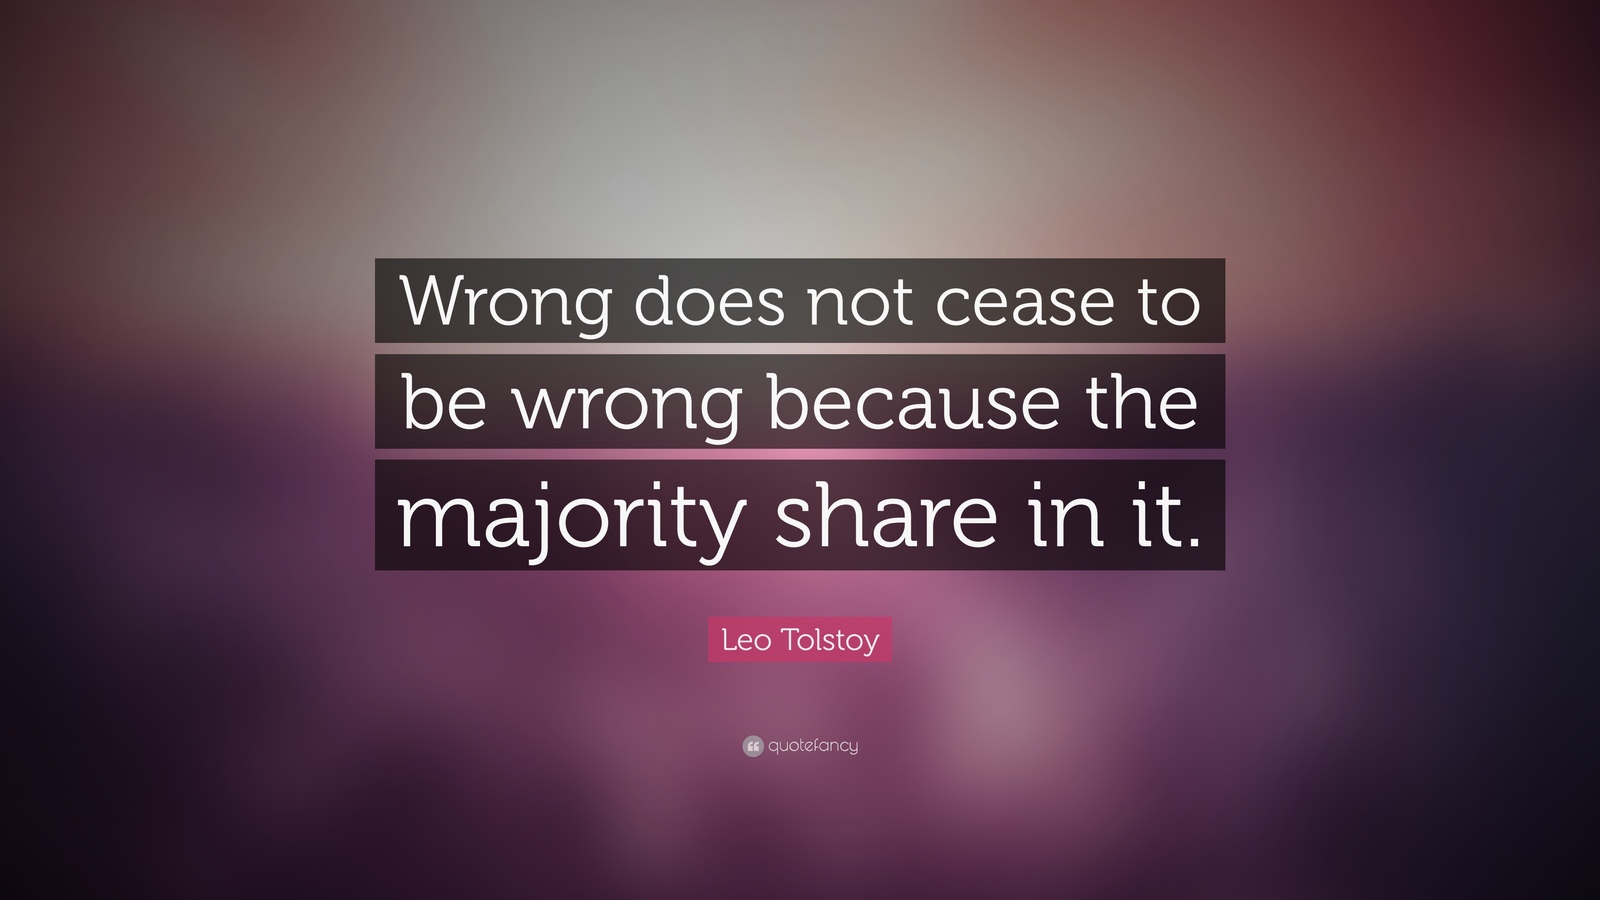 8870-Leo-Tolstoy-Quote-Wrong-does-not-cease-to-be-wrong-because-the.jpg